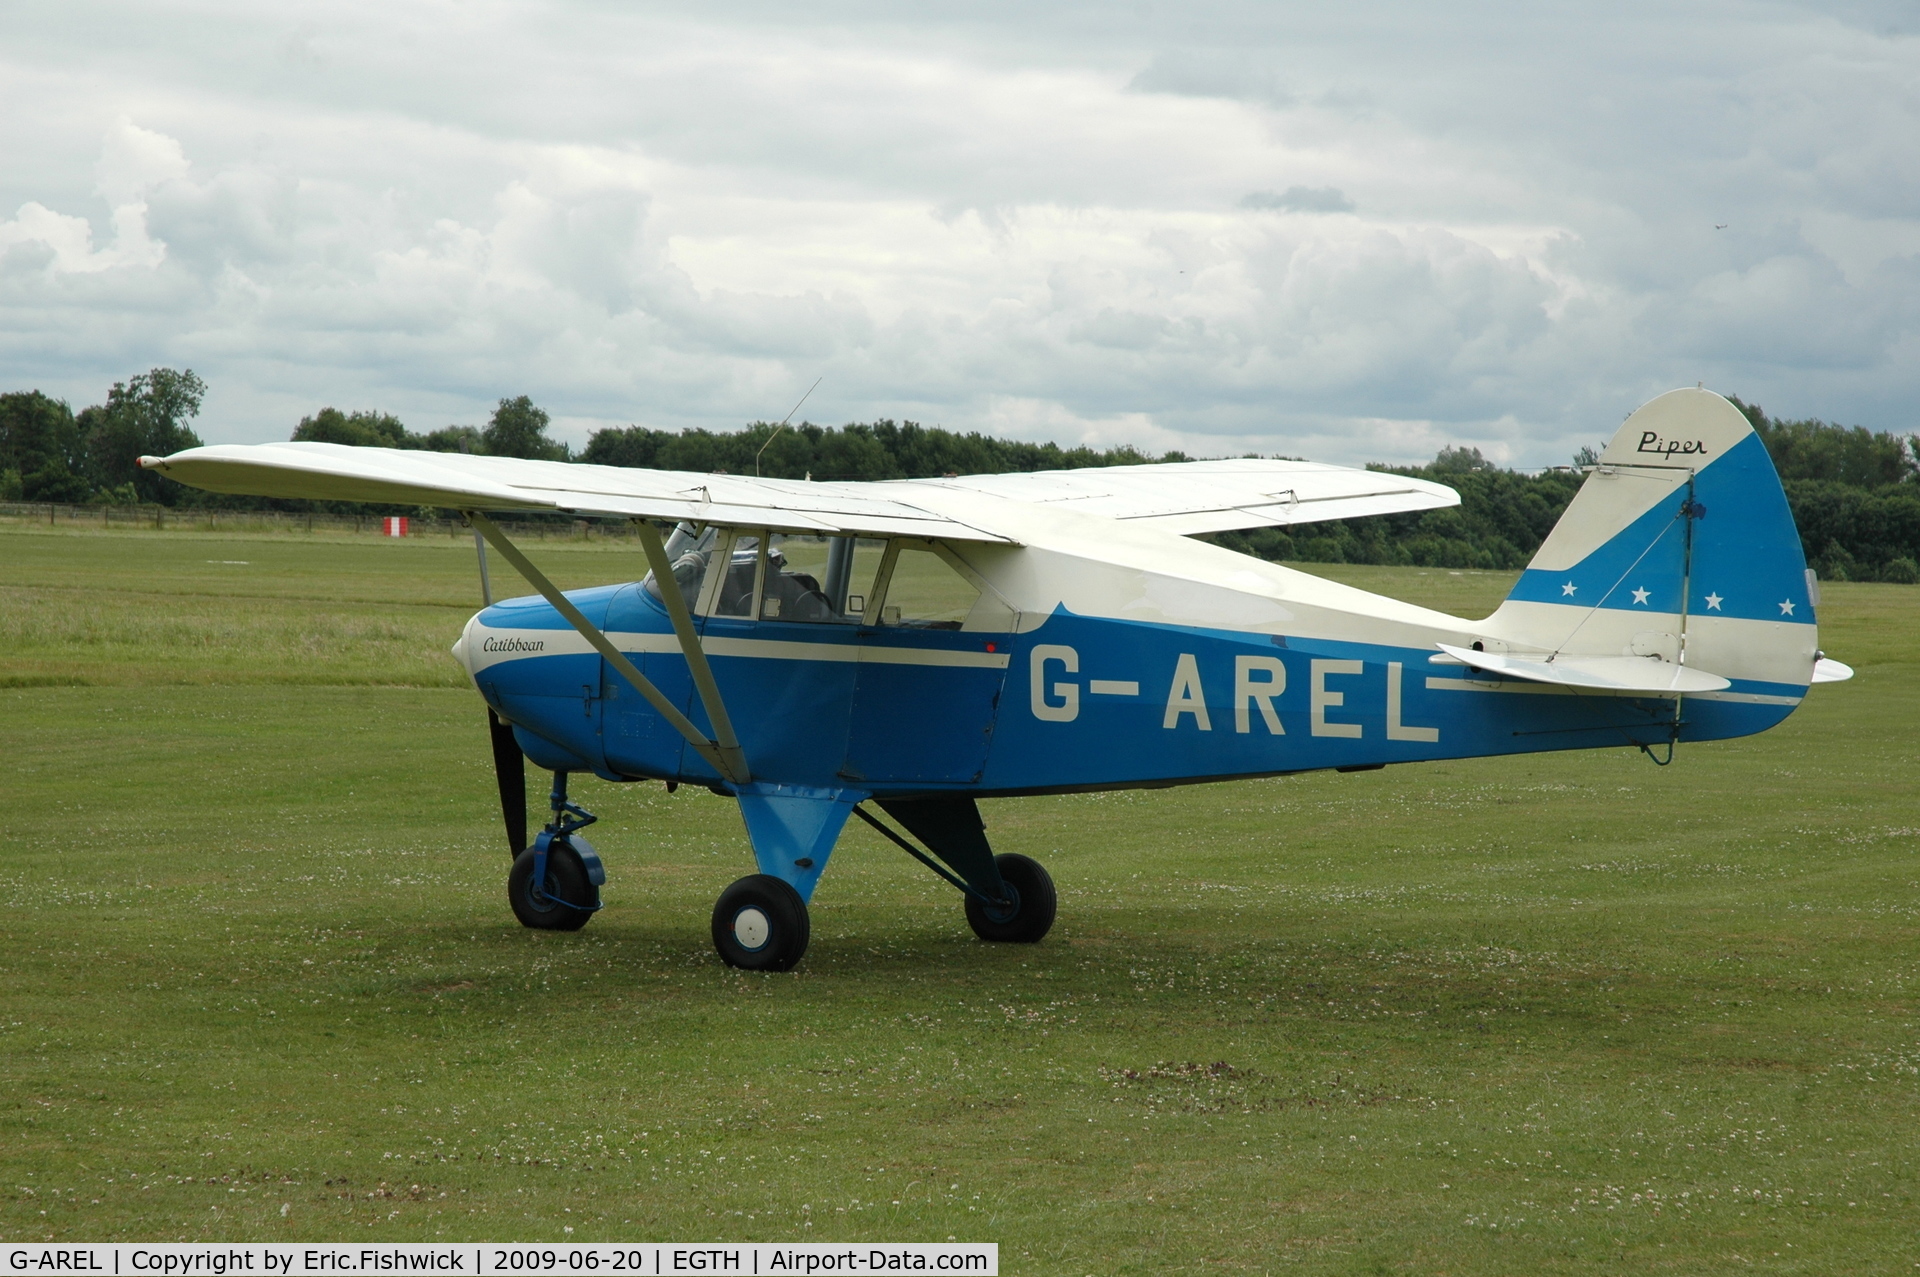 G-AREL, 1960 Piper PA-22-150 Caribbean C/N 22-7284, G-AREL at Shuttleworth Collection Evening Air Display